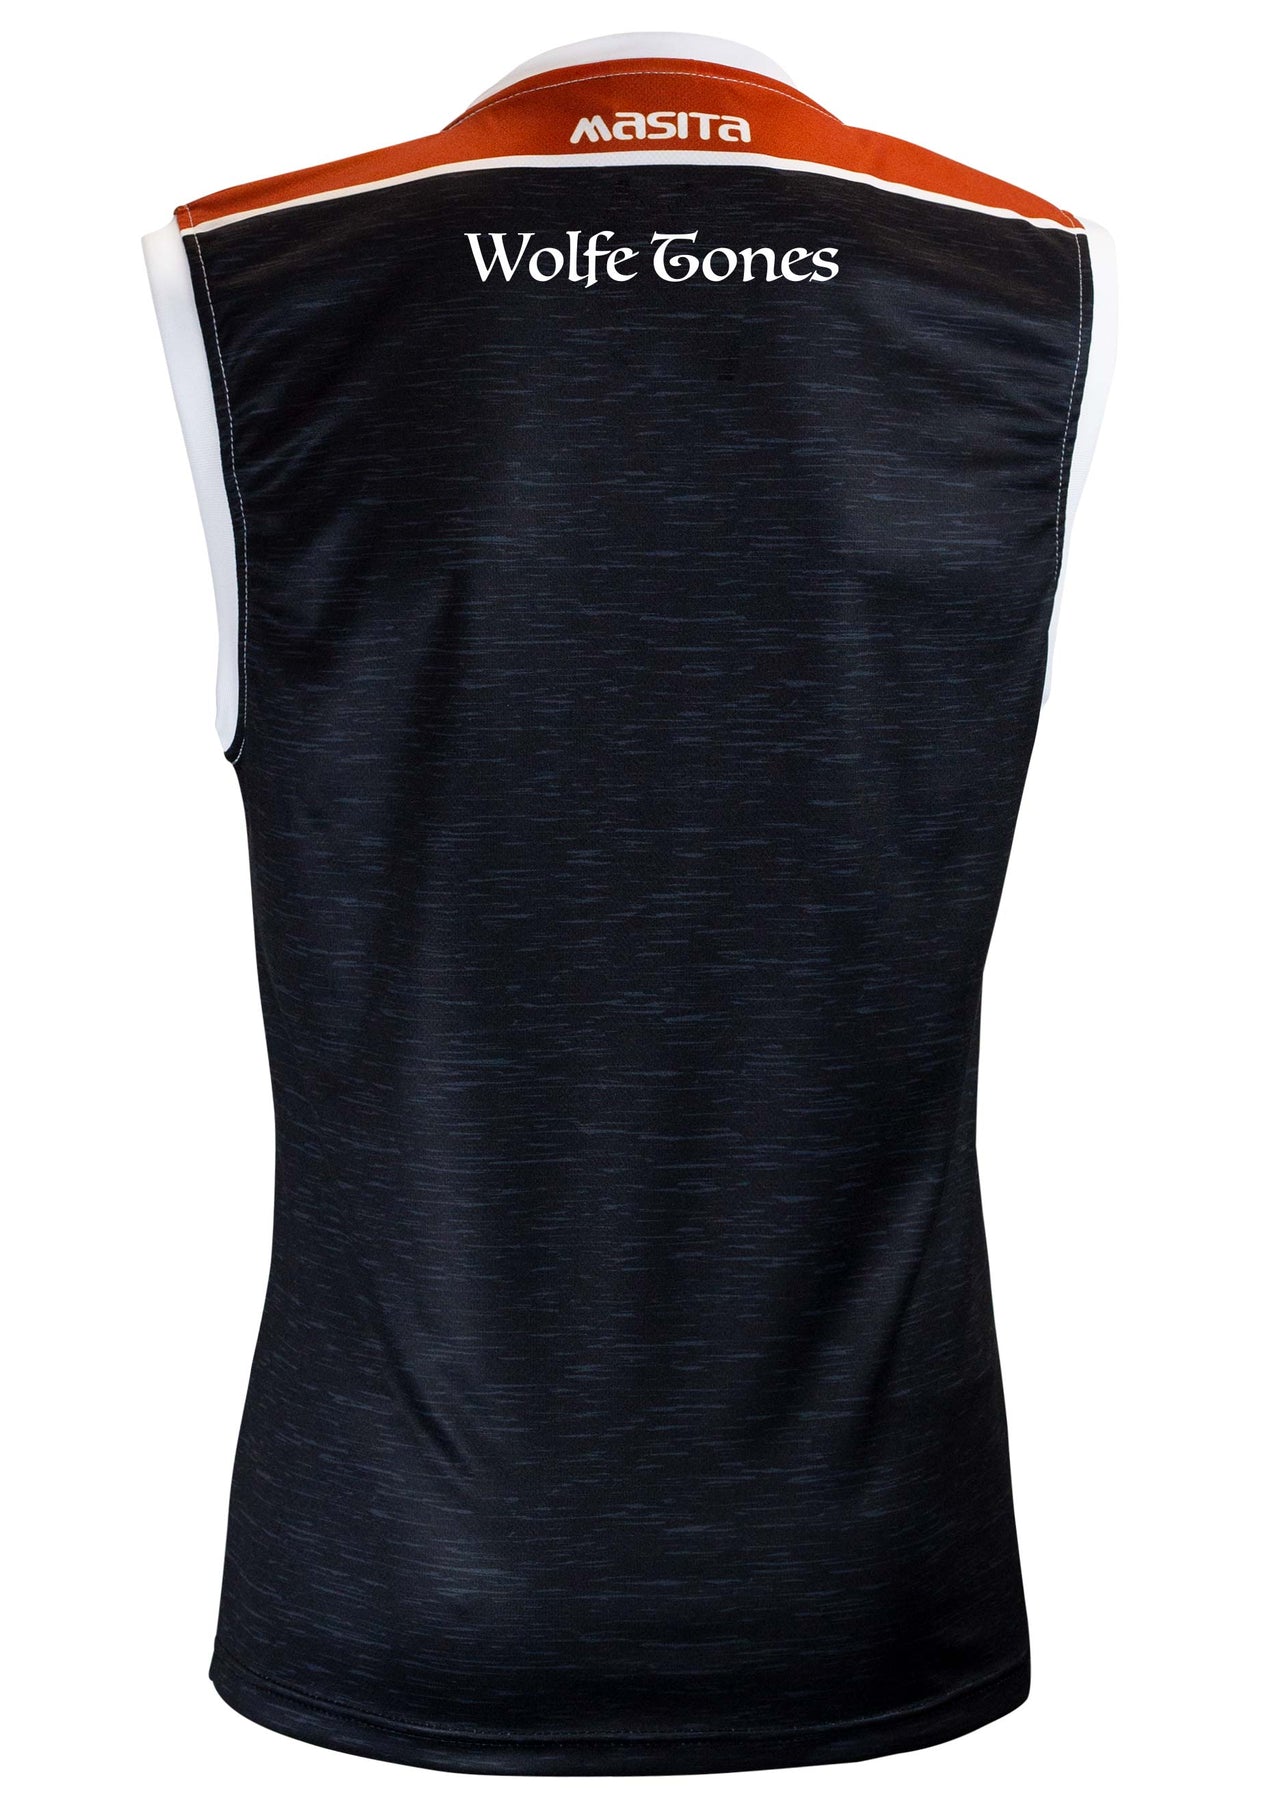 Montana Wolfe Tones Home Sleeveless Shirt Player Fit Adult